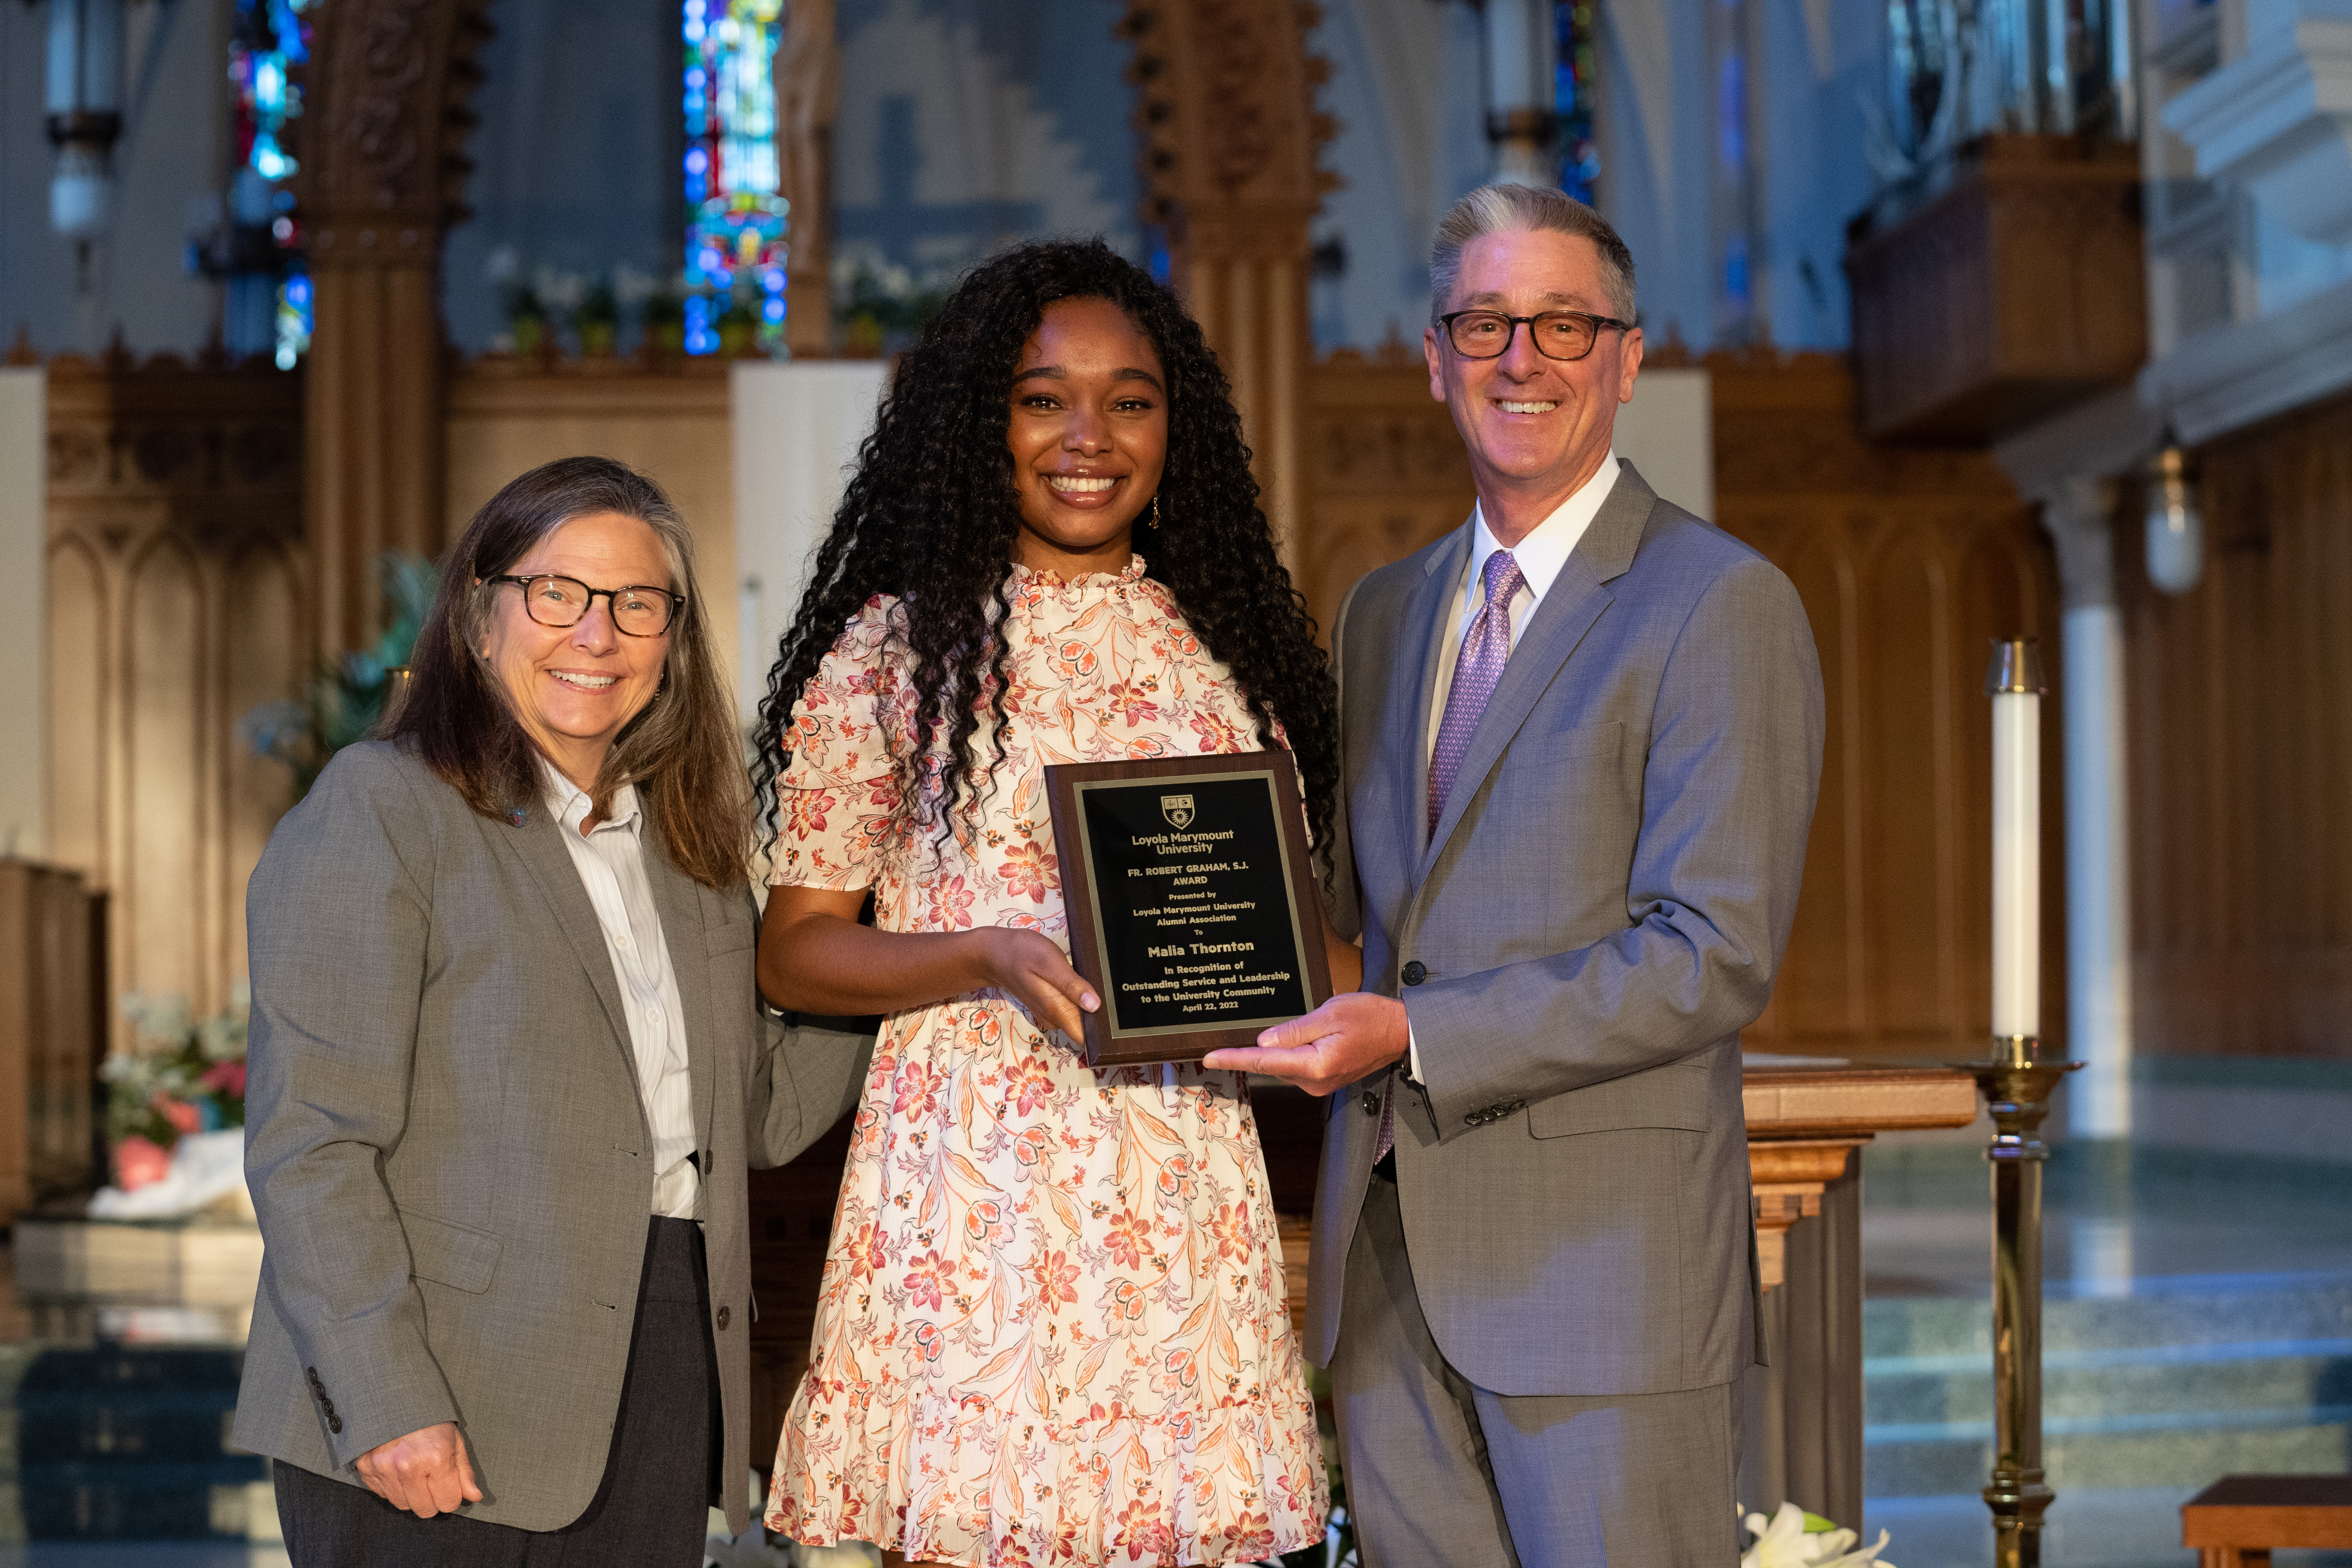 Dean Mangione, President Snyder and Graham Recipient Malia Thornton are standing on the alter smiling and holding a plaque.